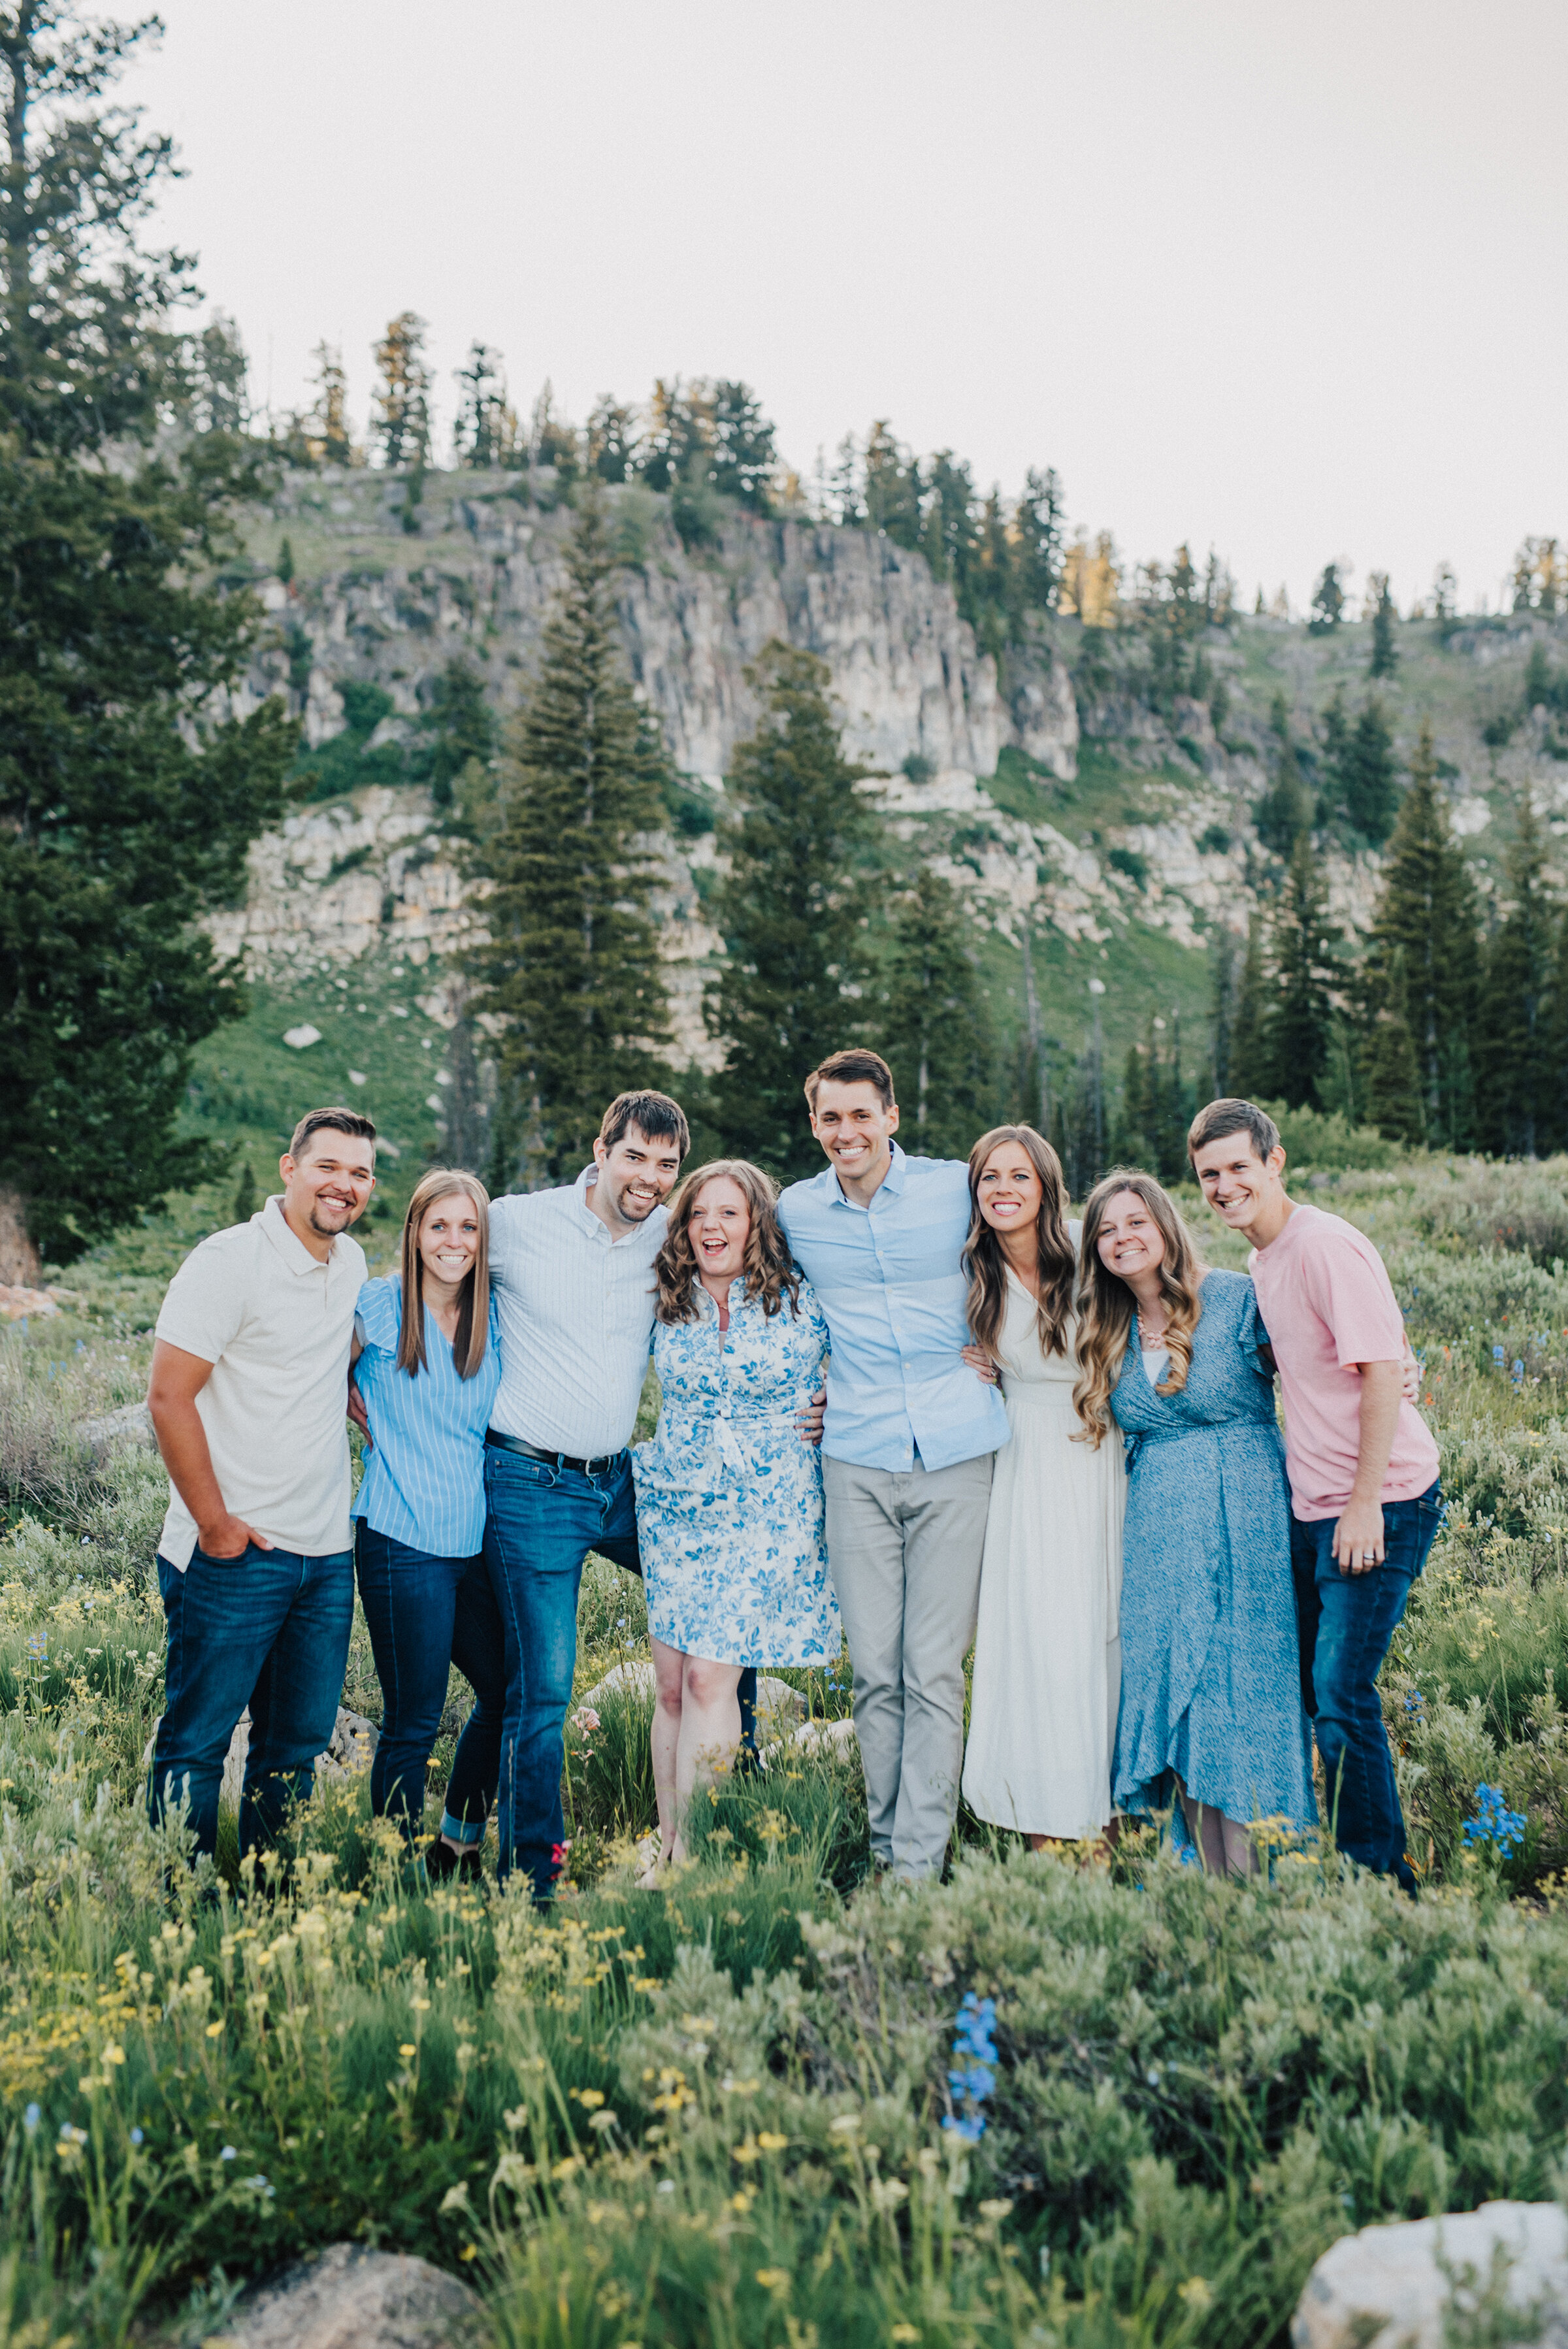 Cute siblings and spouses for this fun family photo session up Logan canyon at Tony Grove. Logan Utah family photographer Kristi Alyse photography Tony Grove forest nature photos Logan canyon light blue family photos wild flowers grand parents children parents spouses reunited dreamy scenic photo shoot #kristialysephotography #utahphotographer #familyphotography #logancanyon #familyphotos #forest #wildflowers #northernutah #familyportraits #family